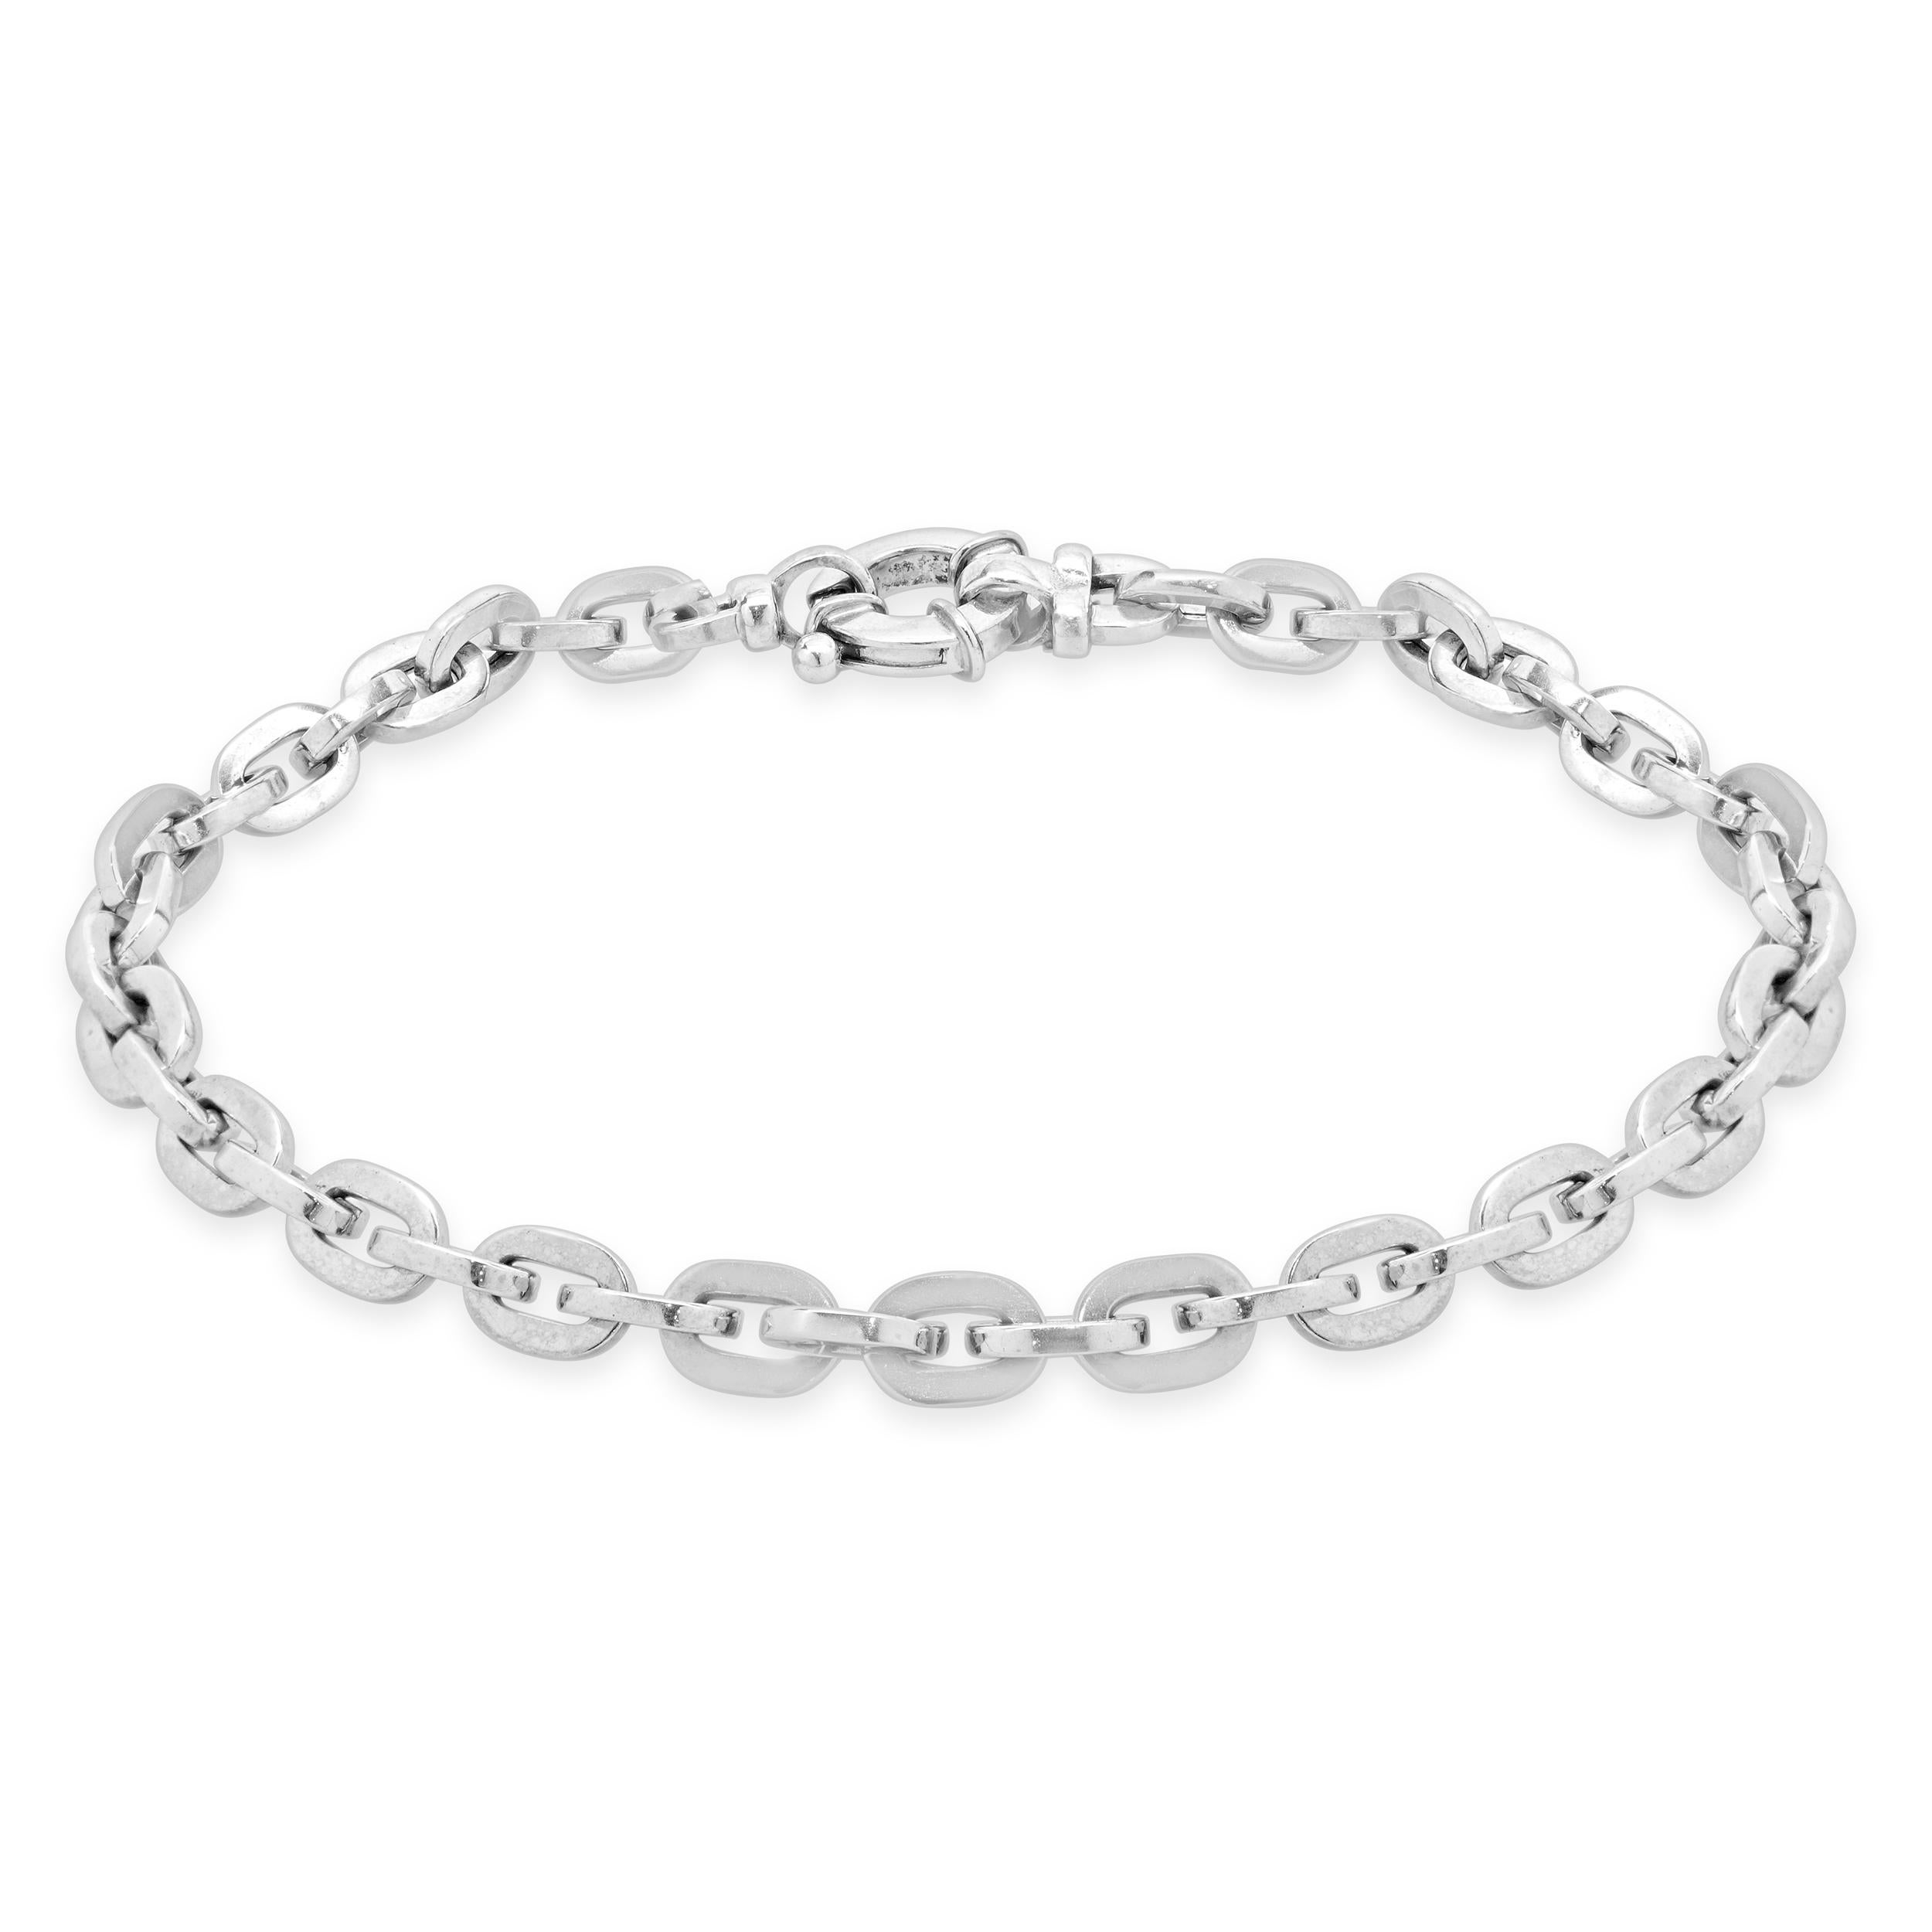 Designer: Milor
Material: 14K white gold
Dimensions: bracelet will fit up to a 8-inch wrist
Weight: 9.97 grams
